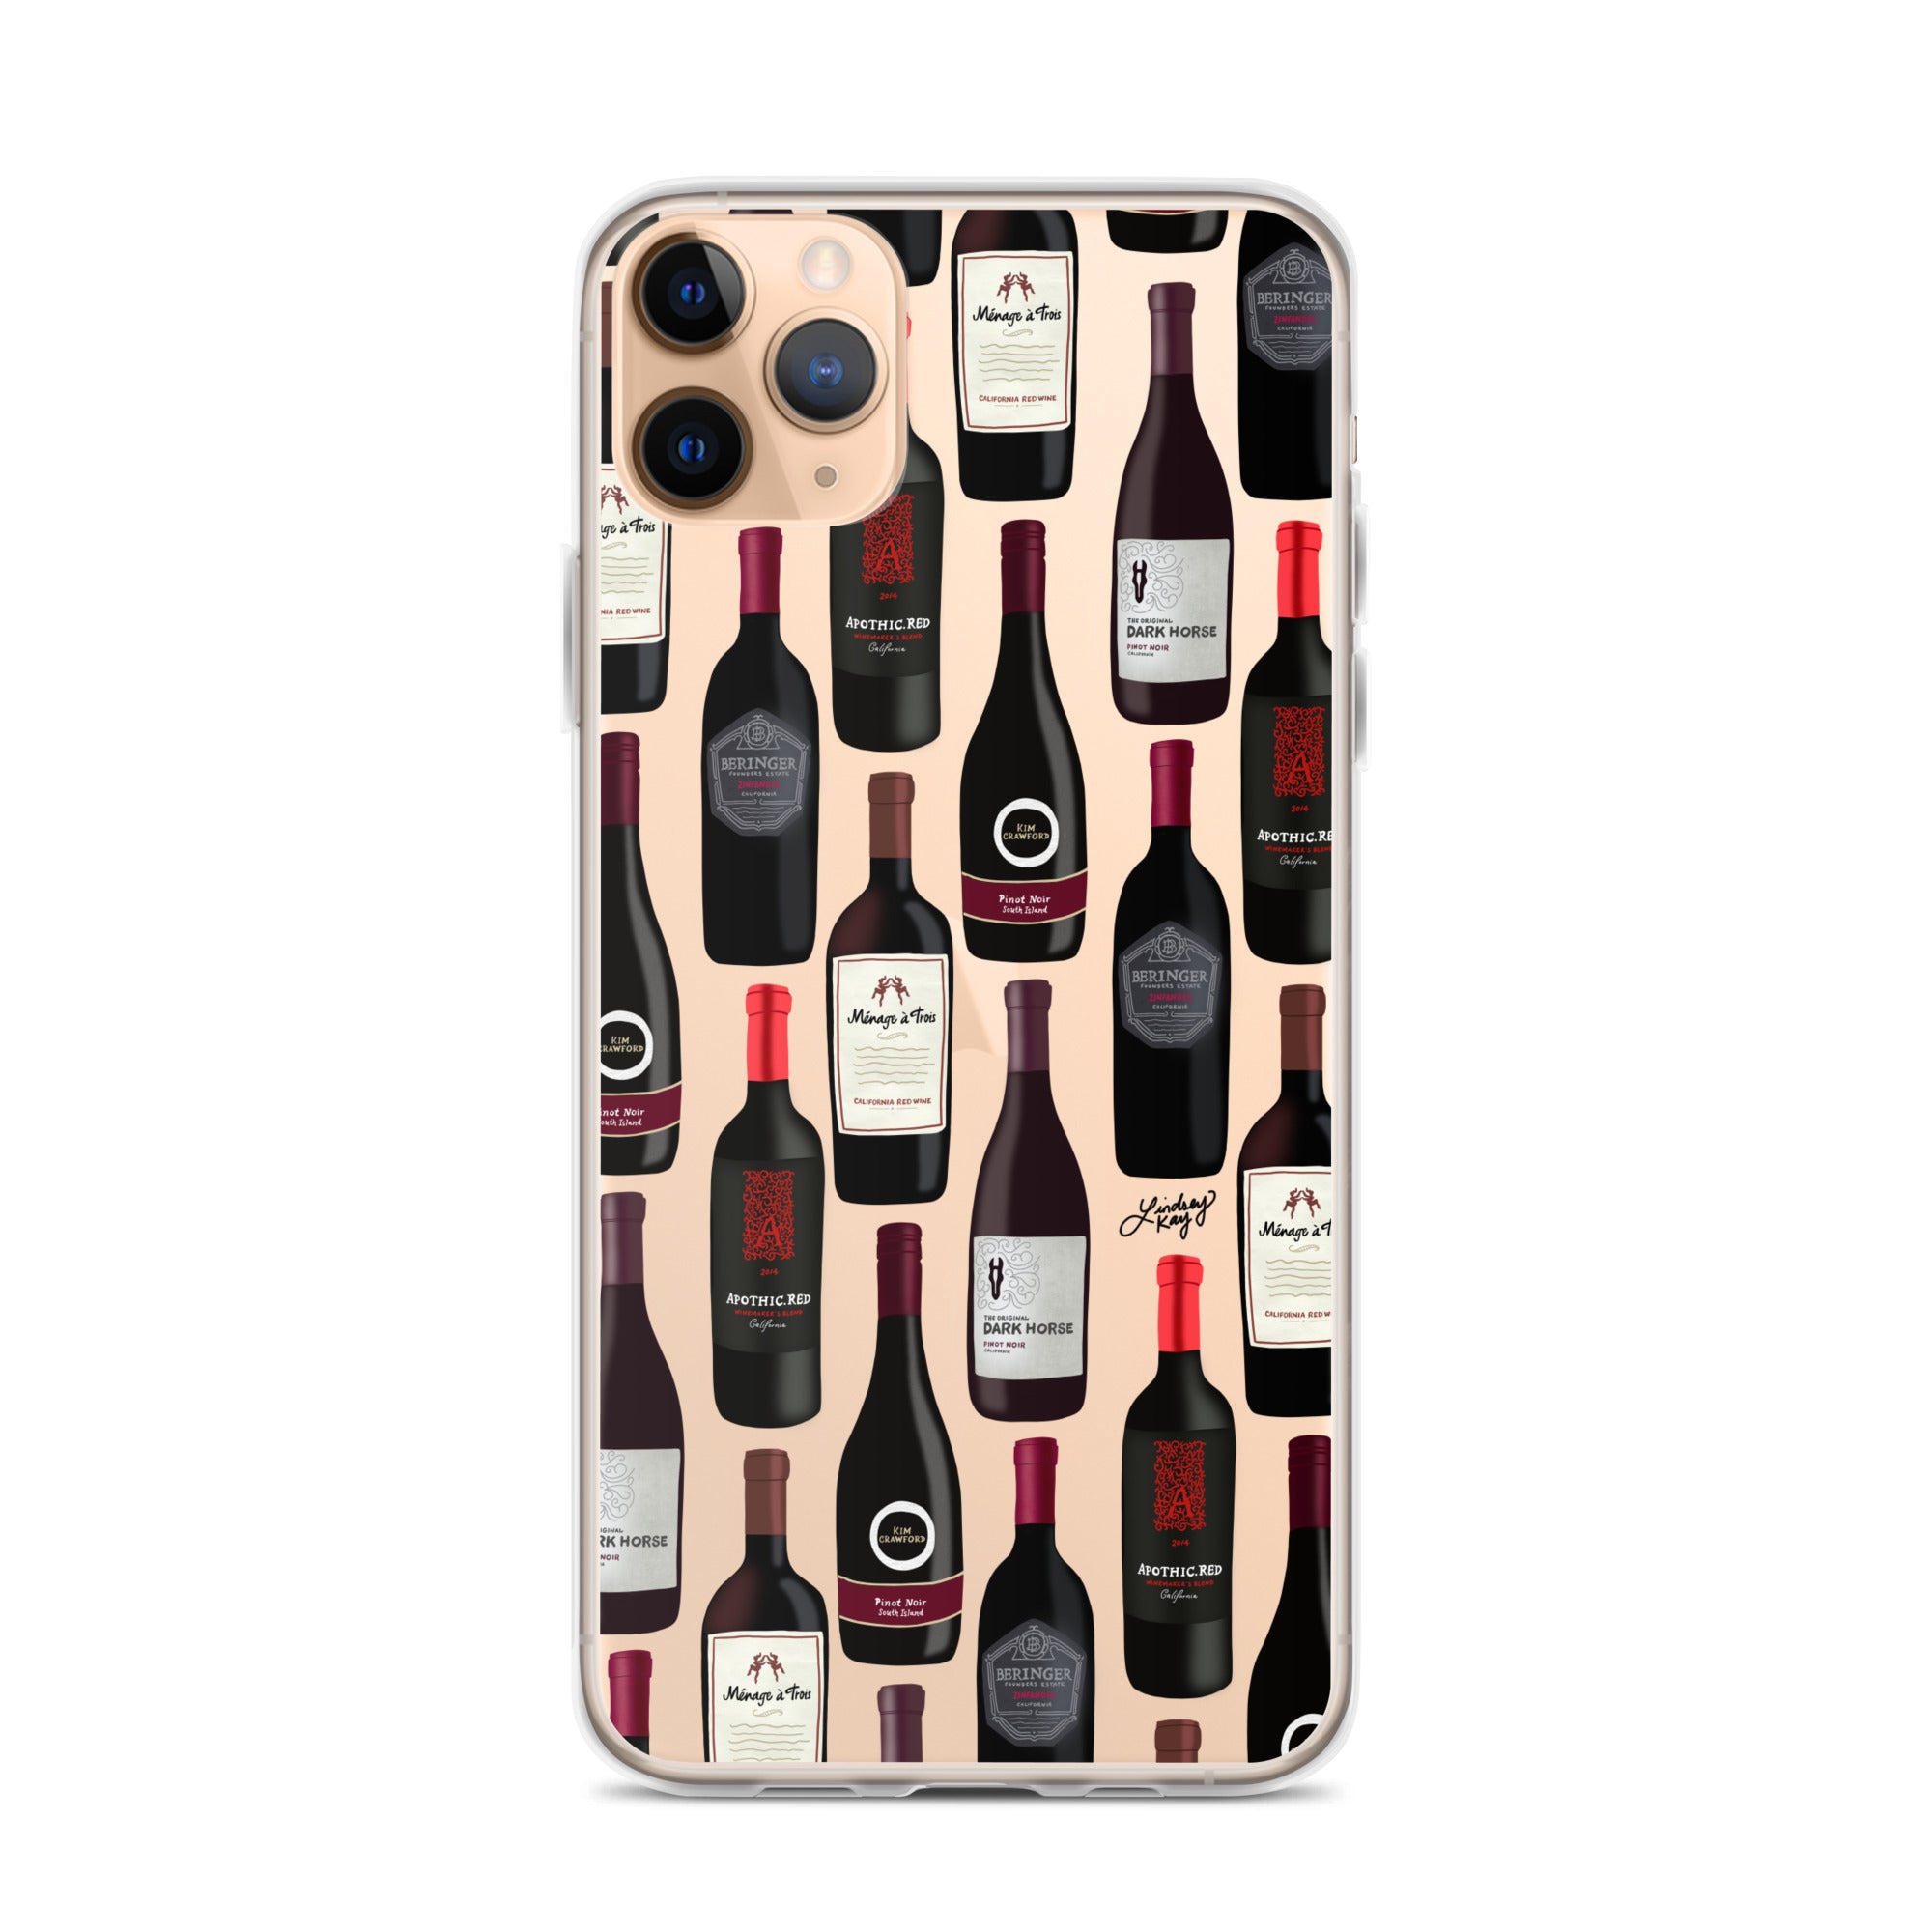 red wine bottles wine-gift iphone-15 iphone case cover protector clear-case cute funny-gift red-wine-lover illustration pattern lindsey kay collective